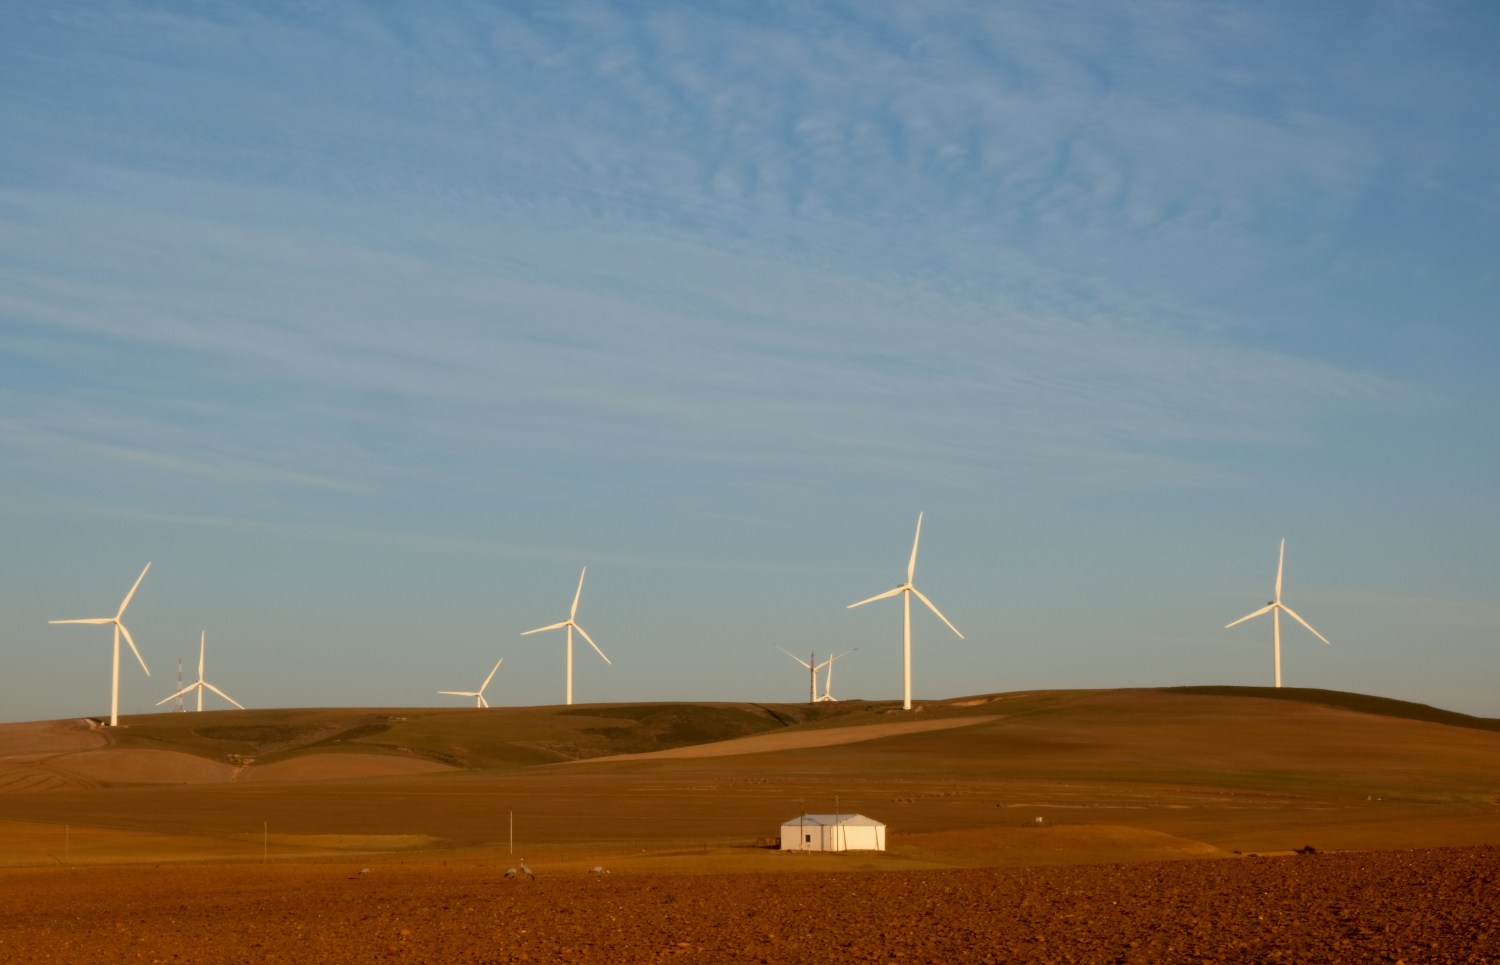 Wind turbines produce renewable energy outside Caledon, South Africa, May 20, 2020. Picture taken May 20, 2020. REUTERS/Mike Hutchings